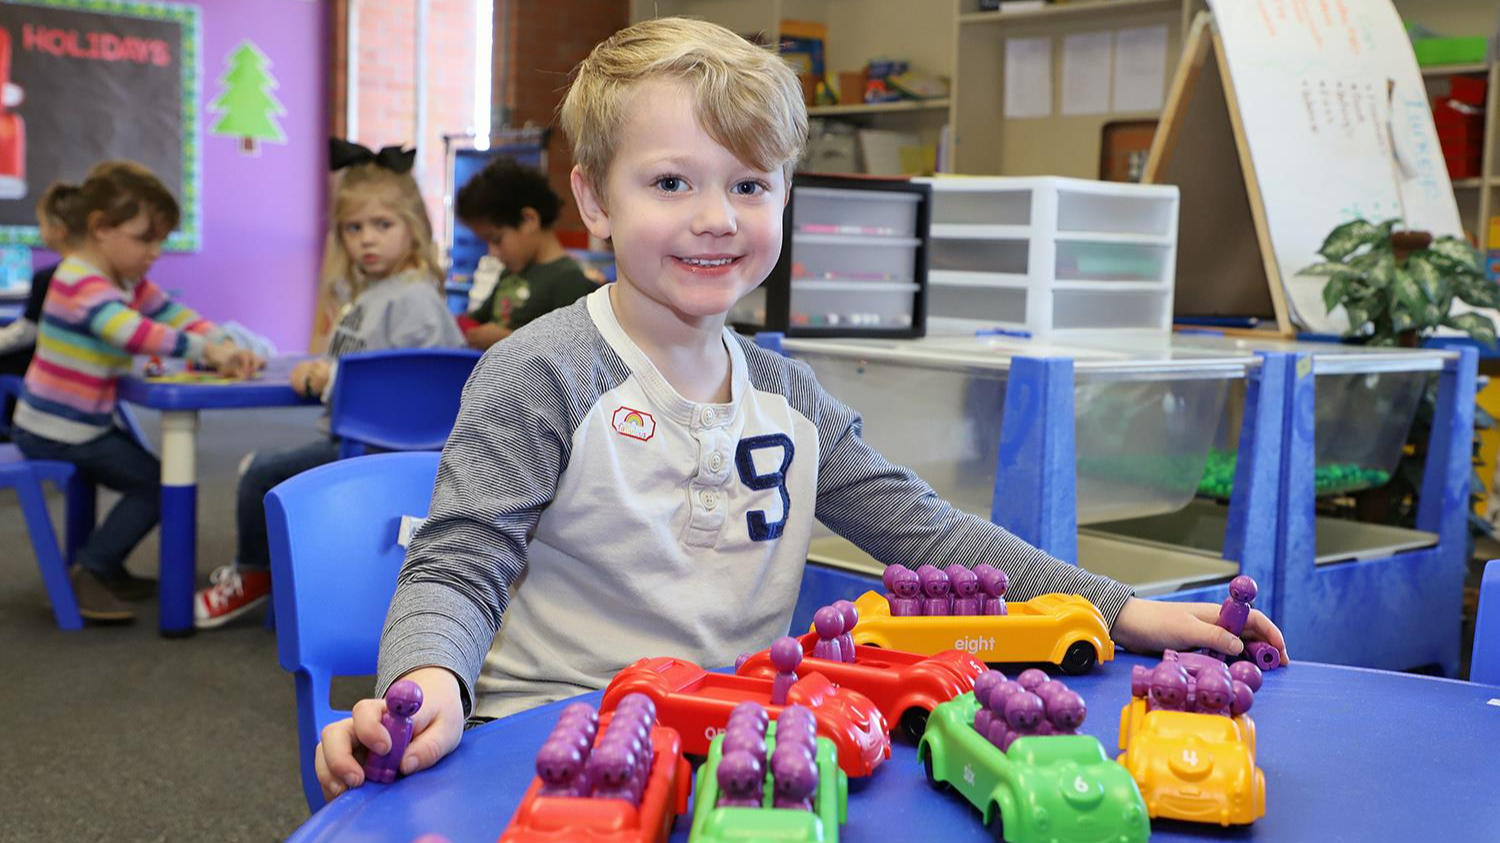 Little boy smiling while learning with manipulatives. Manipulatives of cars and people. 